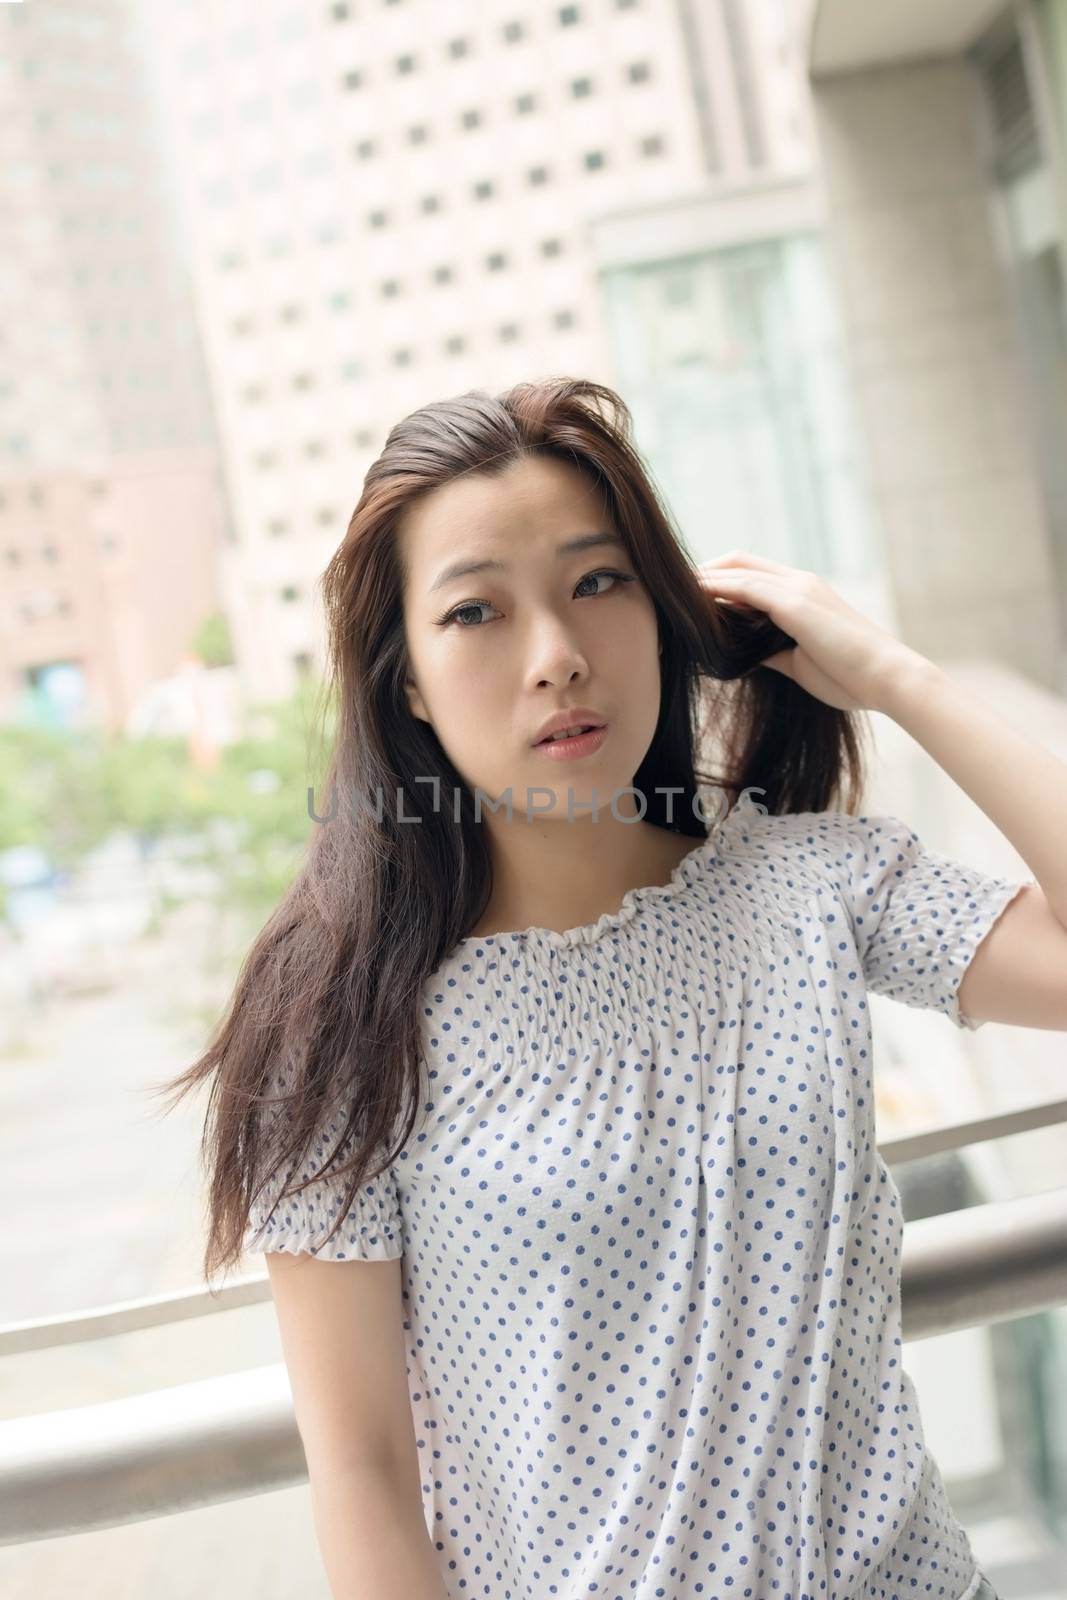 Attractive young woman, closeup glamour portrait at street in modern city, Taipei, Taiwan, Asia.